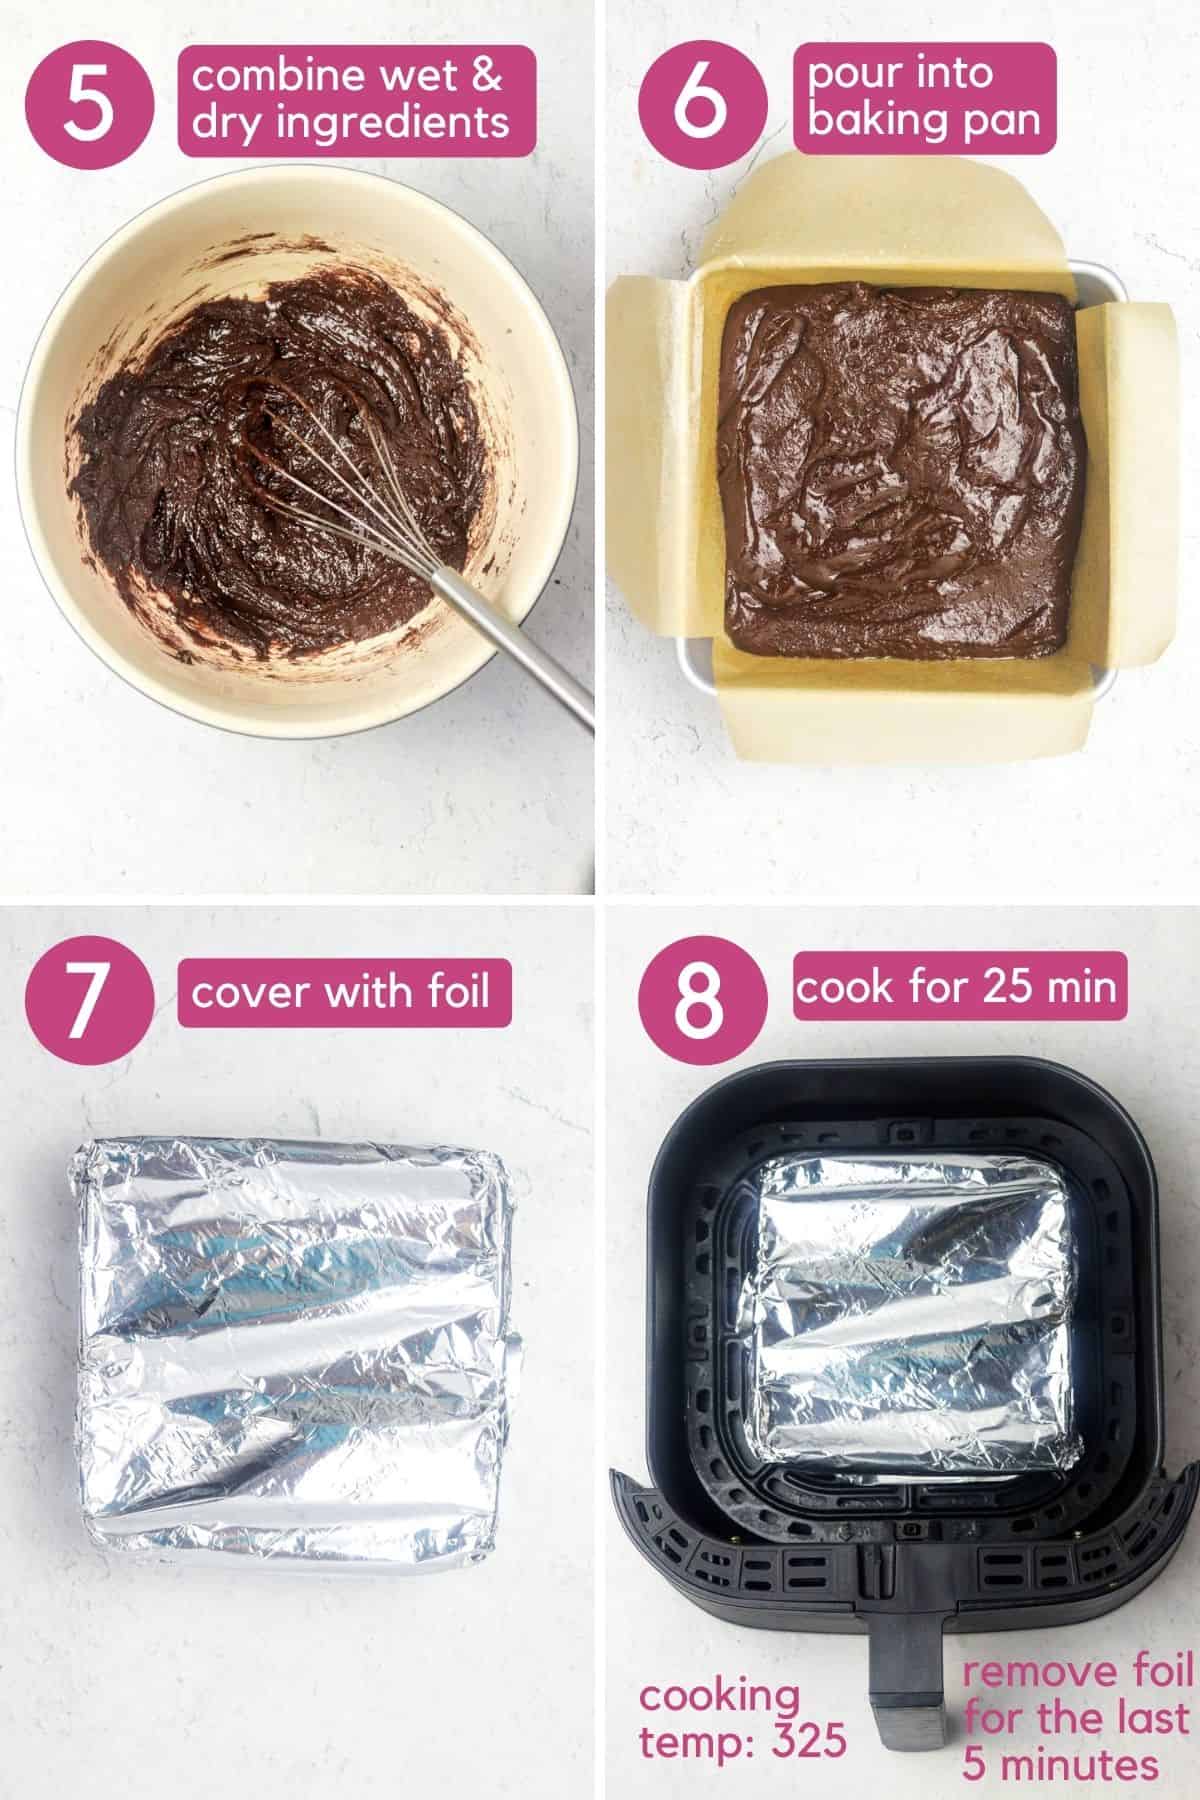 pouring air fryer brownie batter into a pan and baking.